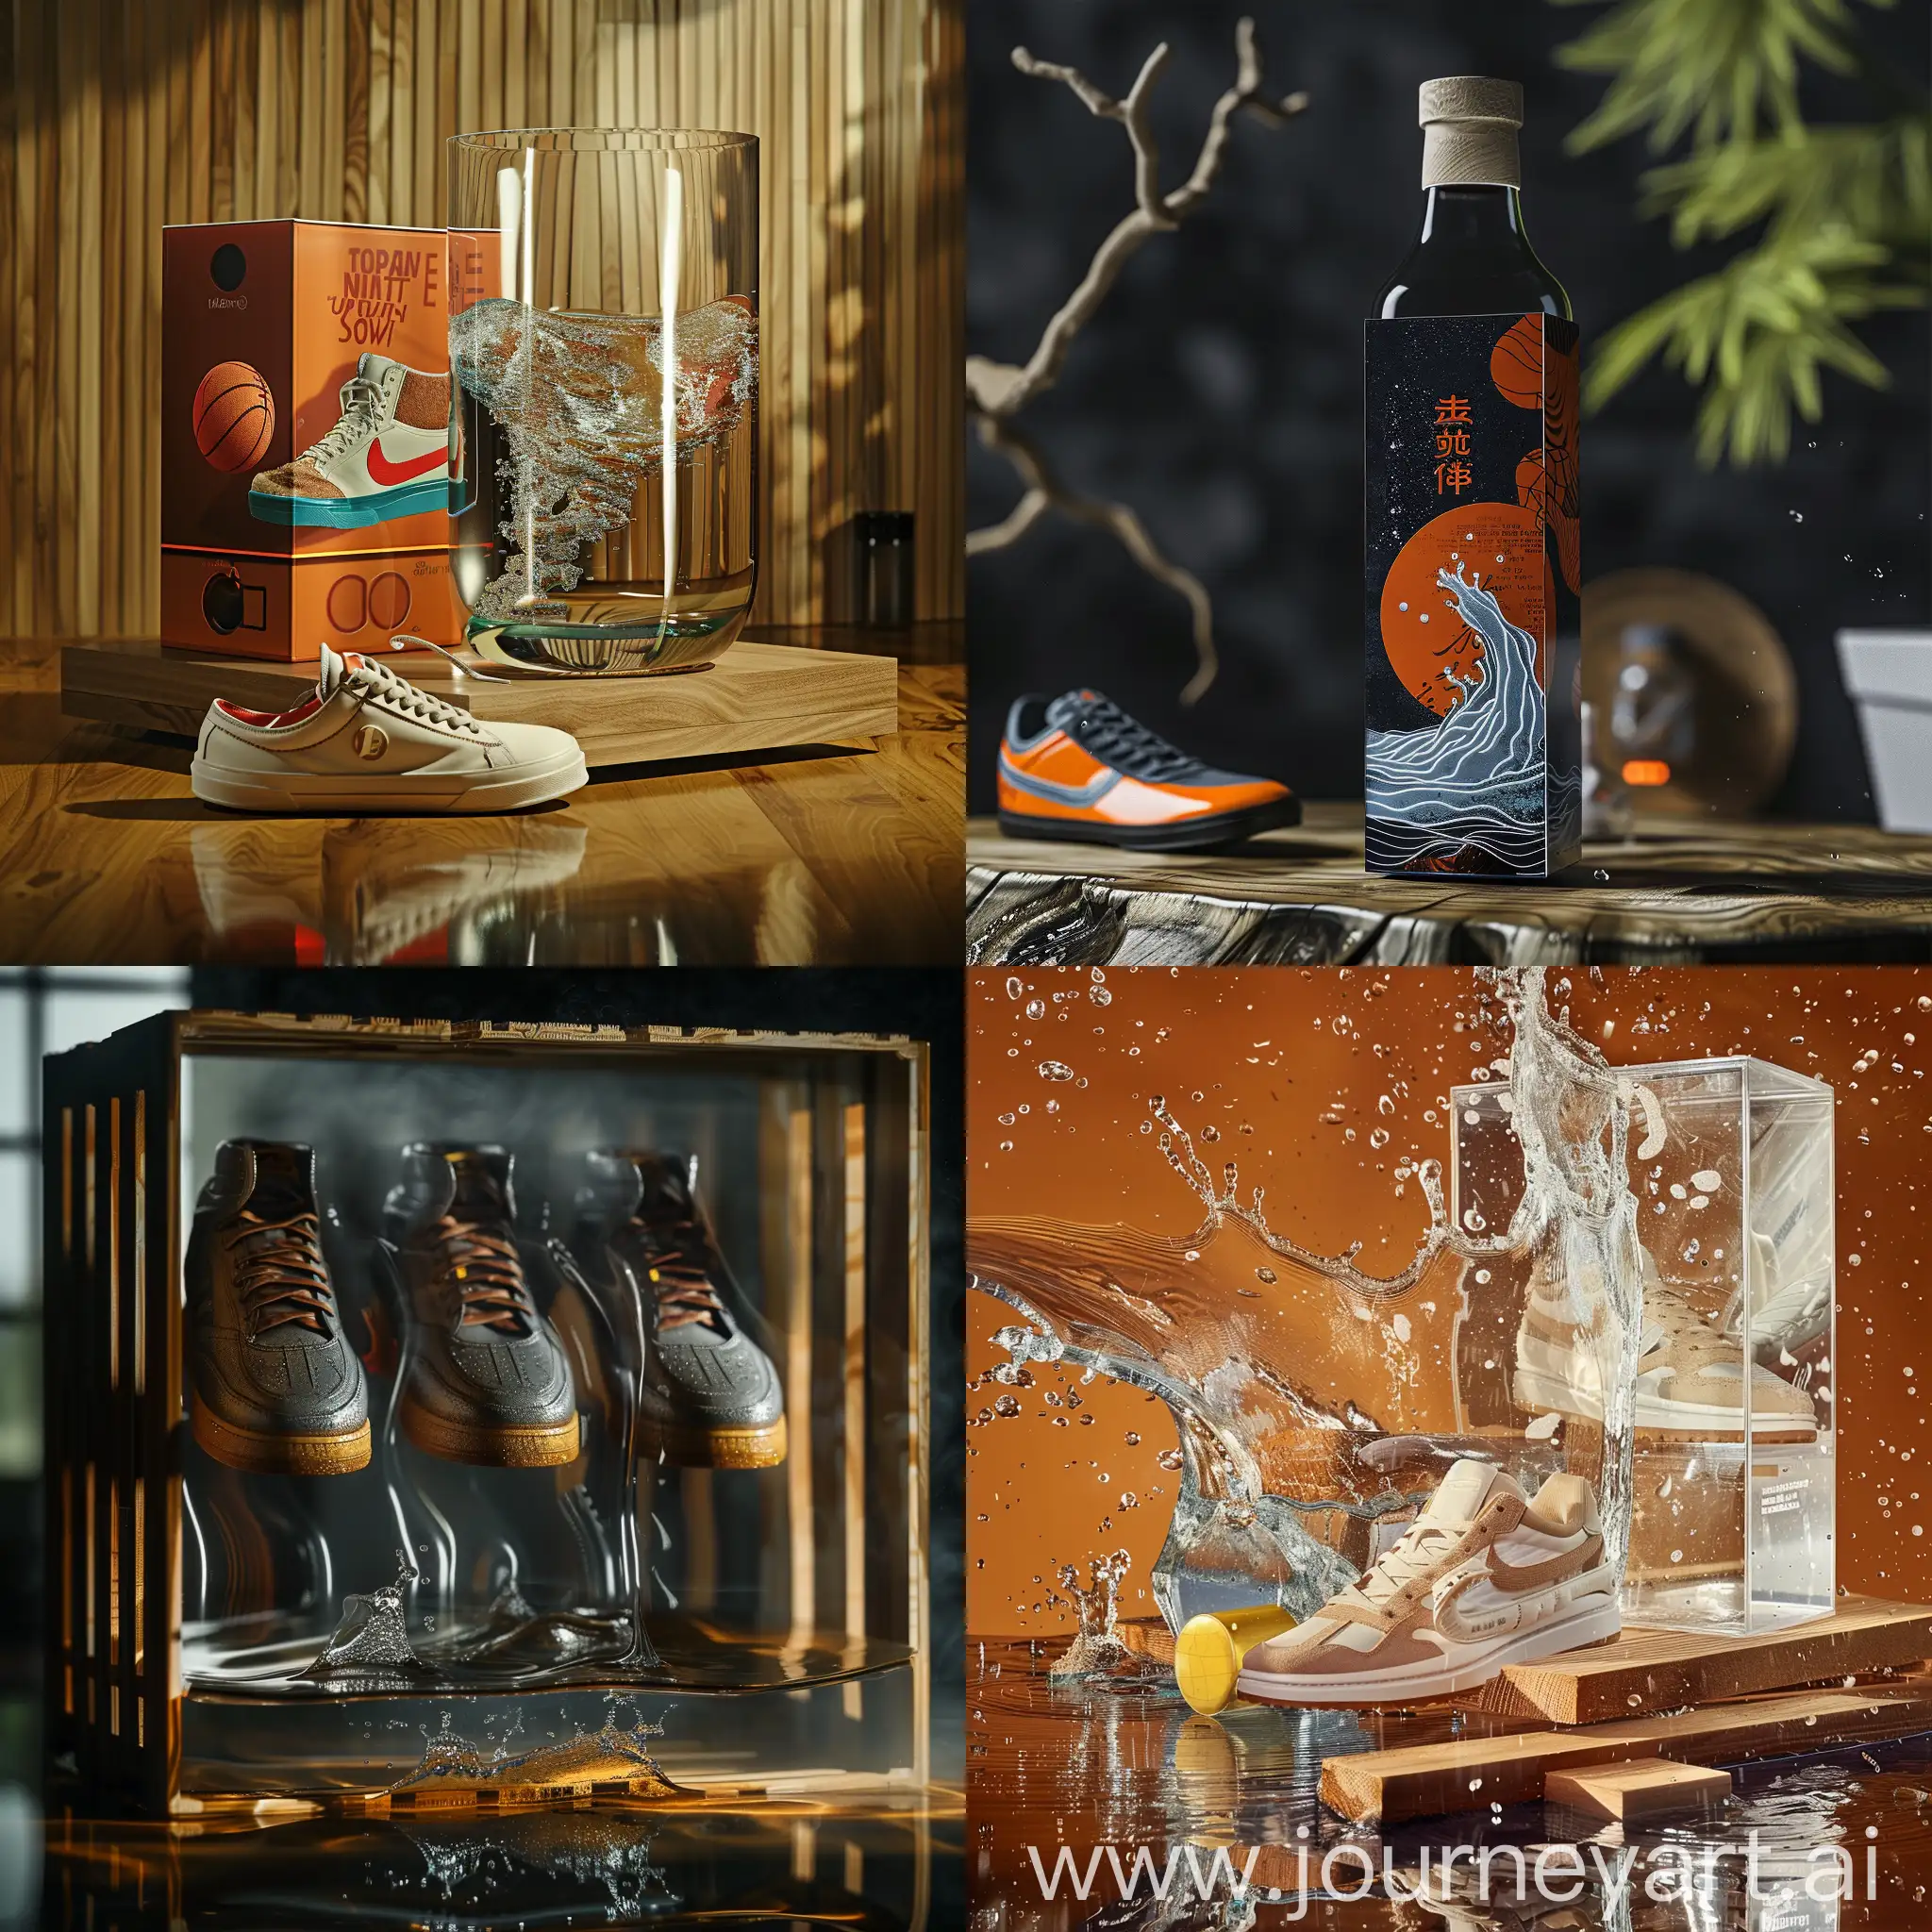 Vintage-1970s-Style-Sports-Shoe-Packaging-on-Glass-and-Wood-Surface